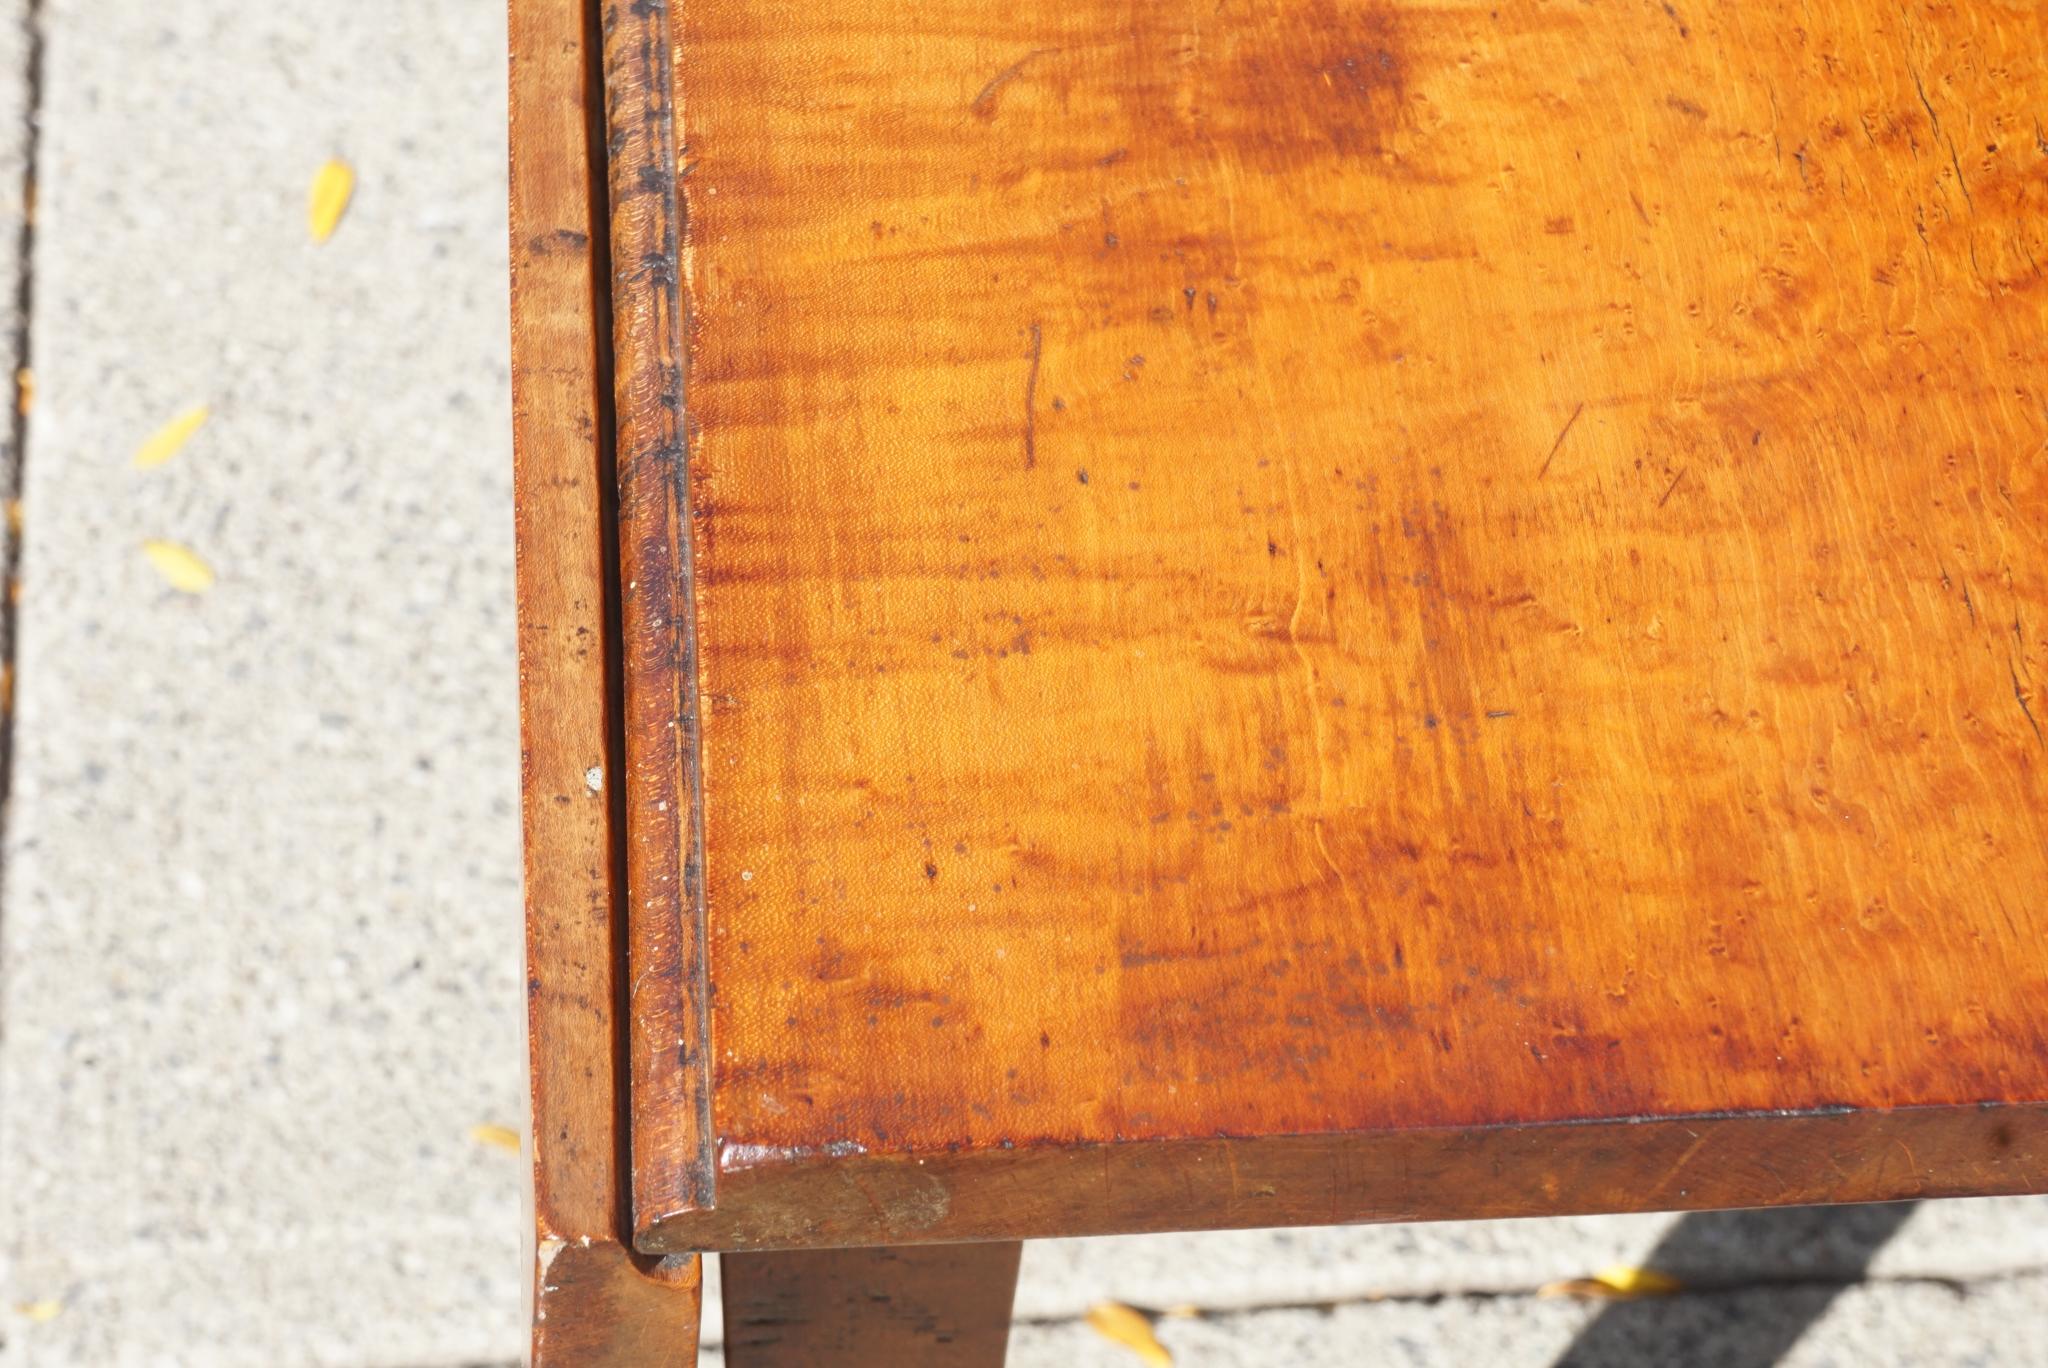 Federal Early 19th Century American Tiger Maple Small Drop Leaf Table im Zustand „Gut“ im Angebot in Hudson, NY